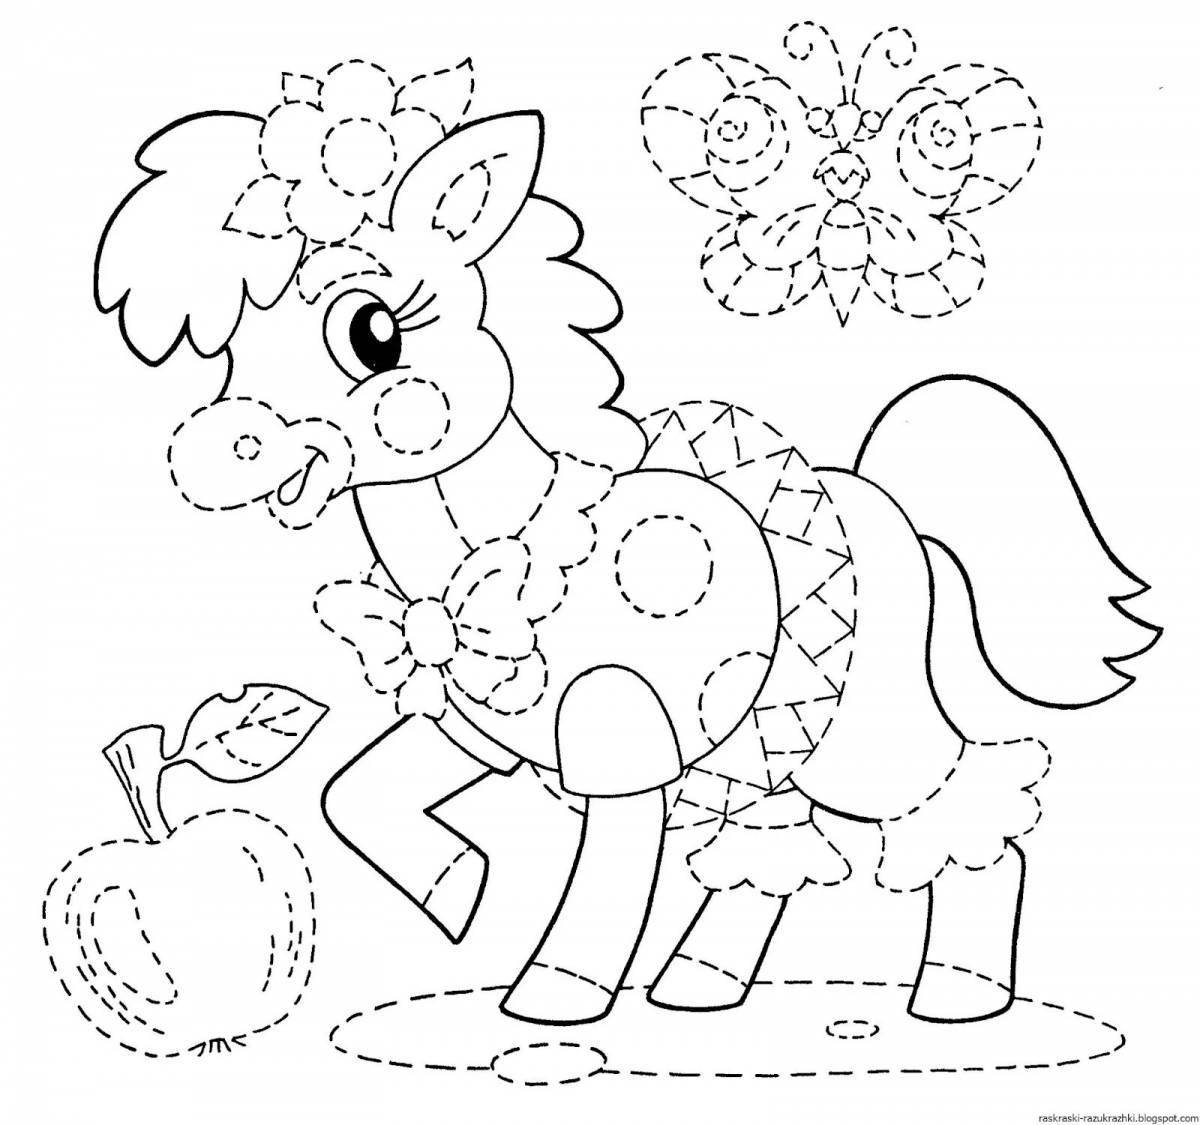 Outstanding coloring game for 4-5 year old girls